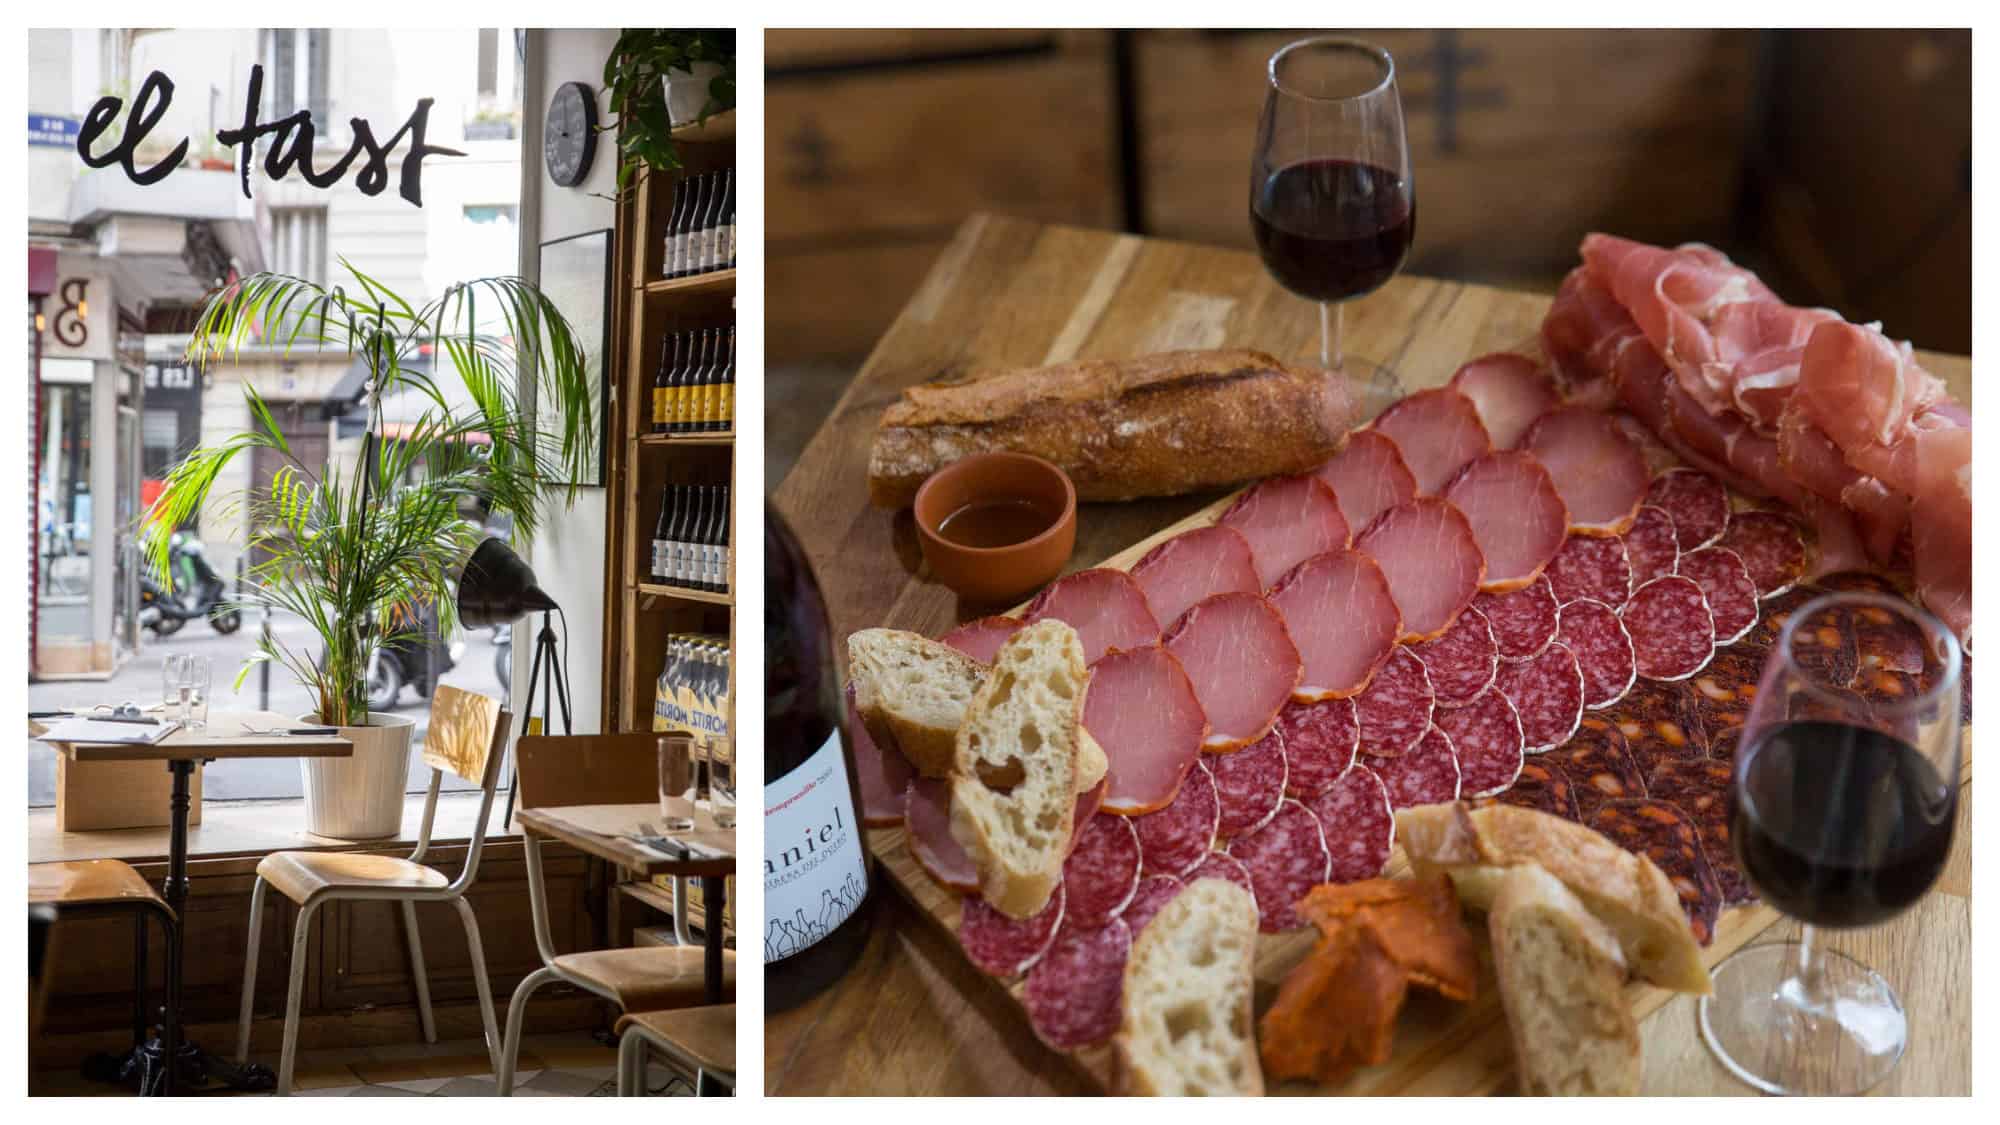 The wooden tables and chairs at El Tast restaurant in Paris (left) and a ham board with crusty baguette and red wine at El Tast (right).